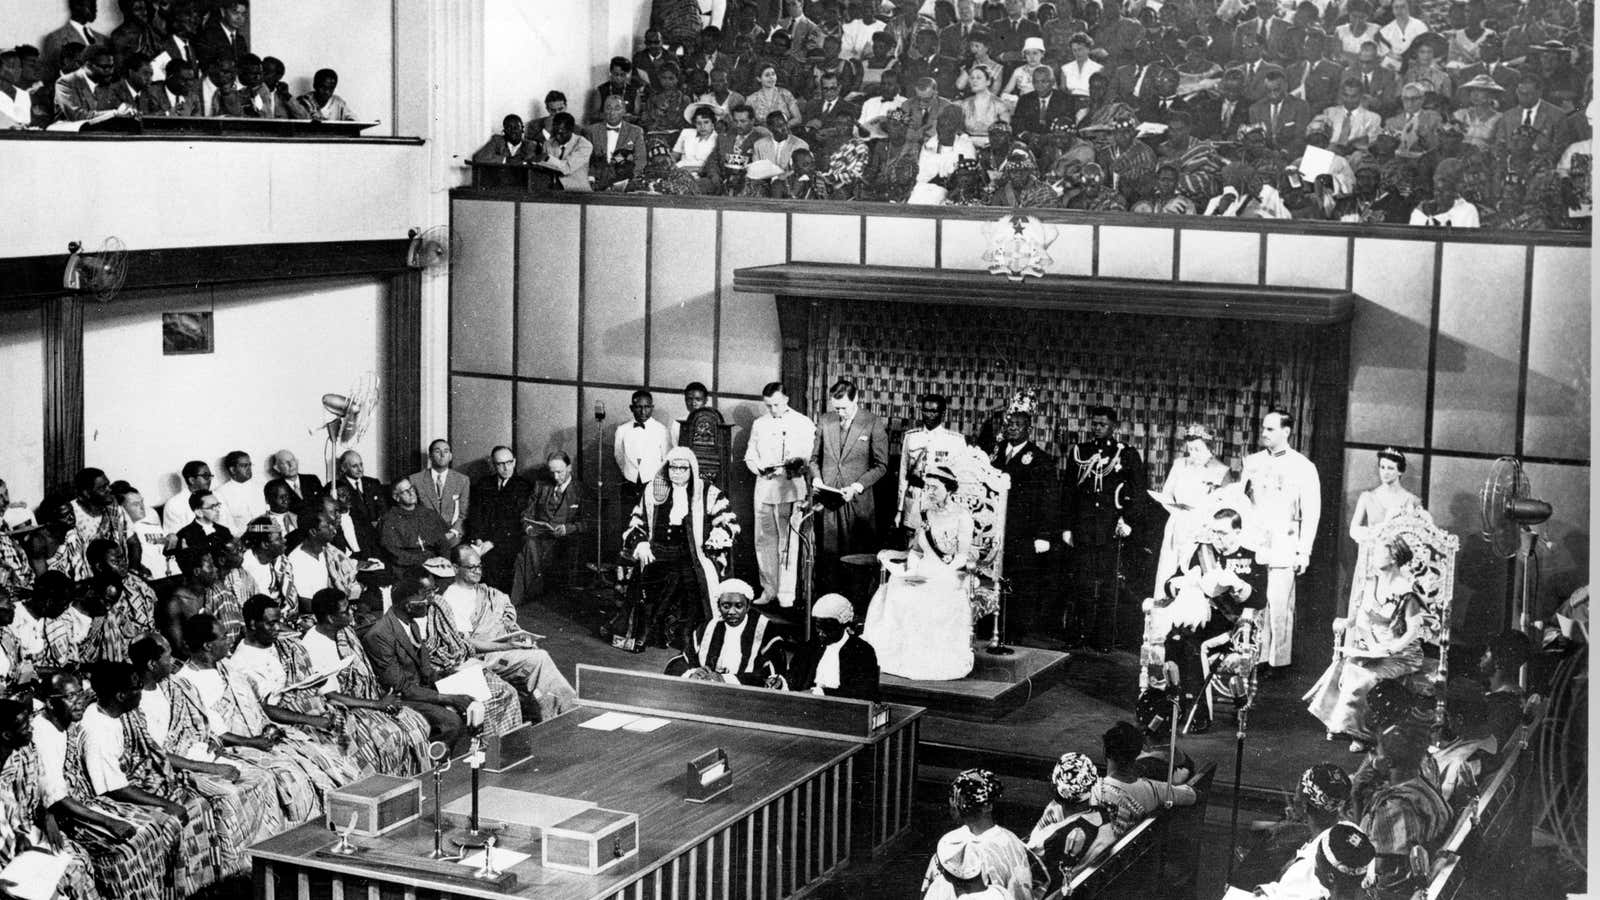 The Duchess of Kent, seated center on dais, reads a message from the Queen of England in the Parliament House at Accra, Ghana, on March 6, 1957, independence day.